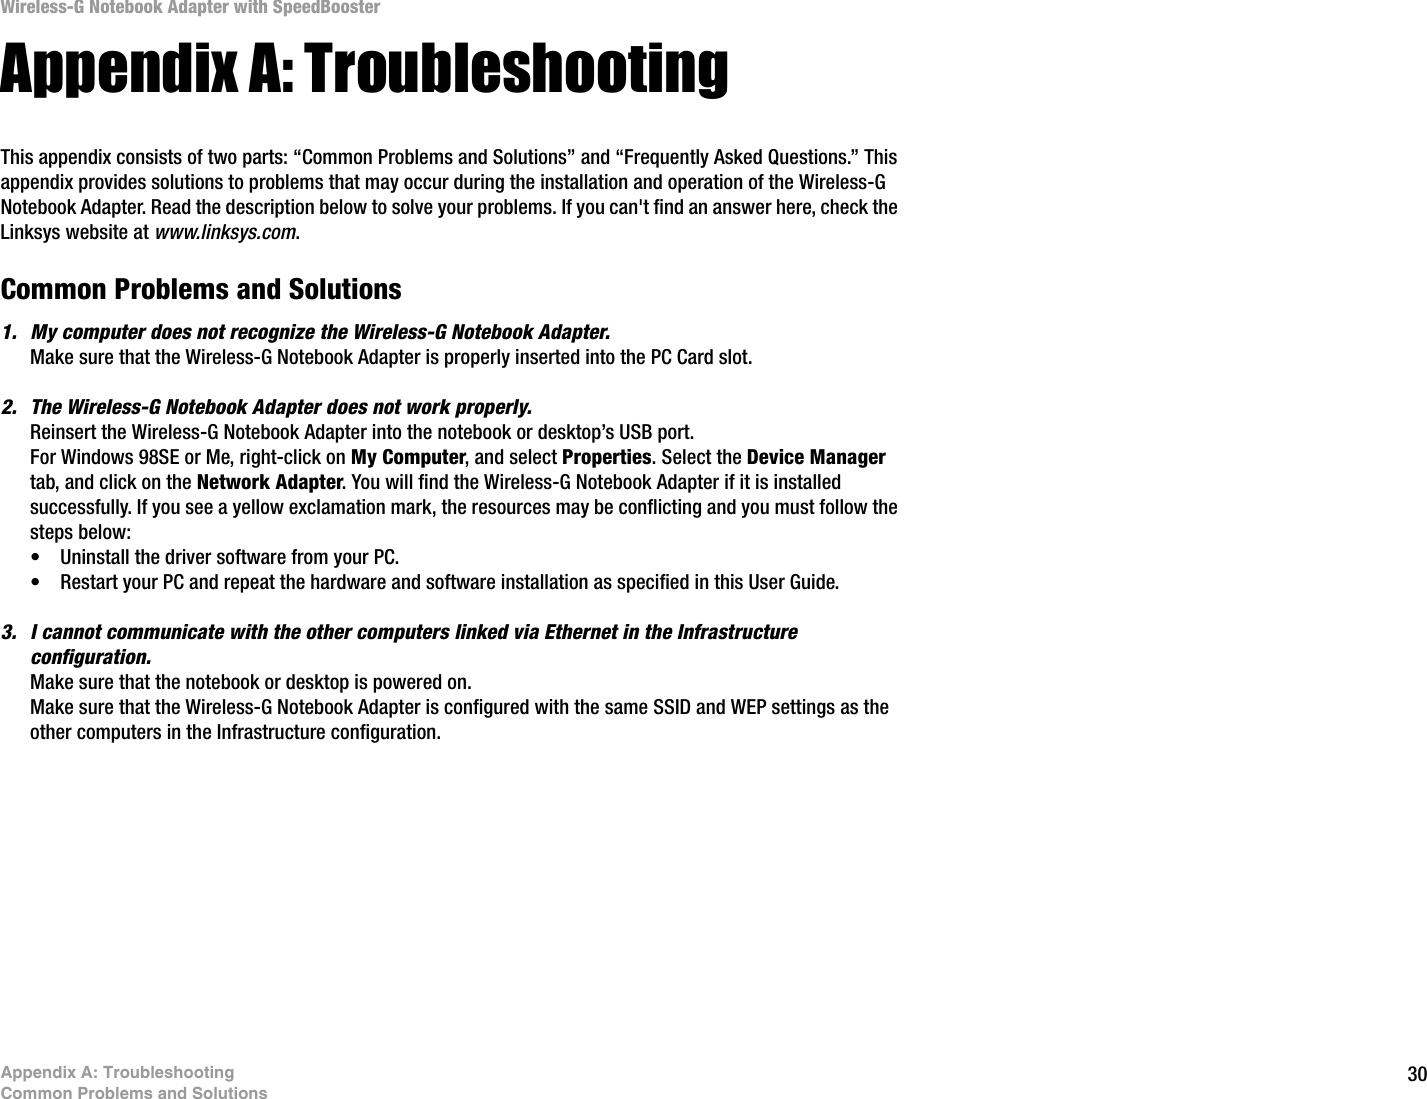 30Appendix A: TroubleshootingCommon Problems and SolutionsWireless-G Notebook Adapter with SpeedBoosterAppendix A: TroubleshootingThis appendix consists of two parts: “Common Problems and Solutions” and “Frequently Asked Questions.” This appendix provides solutions to problems that may occur during the installation and operation of the Wireless-G Notebook Adapter. Read the description below to solve your problems. If you can&apos;t find an answer here, check the Linksys website at www.linksys.com.Common Problems and Solutions1. My computer does not recognize the Wireless-G Notebook Adapter.Make sure that the Wireless-G Notebook Adapter is properly inserted into the PC Card slot.2. The Wireless-G Notebook Adapter does not work properly.Reinsert the Wireless-G Notebook Adapter into the notebook or desktop’s USB port. For Windows 98SE or Me, right-click on My Computer, and select Properties. Select the Device Manager tab, and click on the Network Adapter. You will find the Wireless-G Notebook Adapter if it is installed successfully. If you see a yellow exclamation mark, the resources may be conflicting and you must follow the steps below:• Uninstall the driver software from your PC.• Restart your PC and repeat the hardware and software installation as specified in this User Guide.3. I cannot communicate with the other computers linked via Ethernet in the Infrastructure configuration.Make sure that the notebook or desktop is powered on.Make sure that the Wireless-G Notebook Adapter is configured with the same SSID and WEP settings as the other computers in the Infrastructure configuration. 